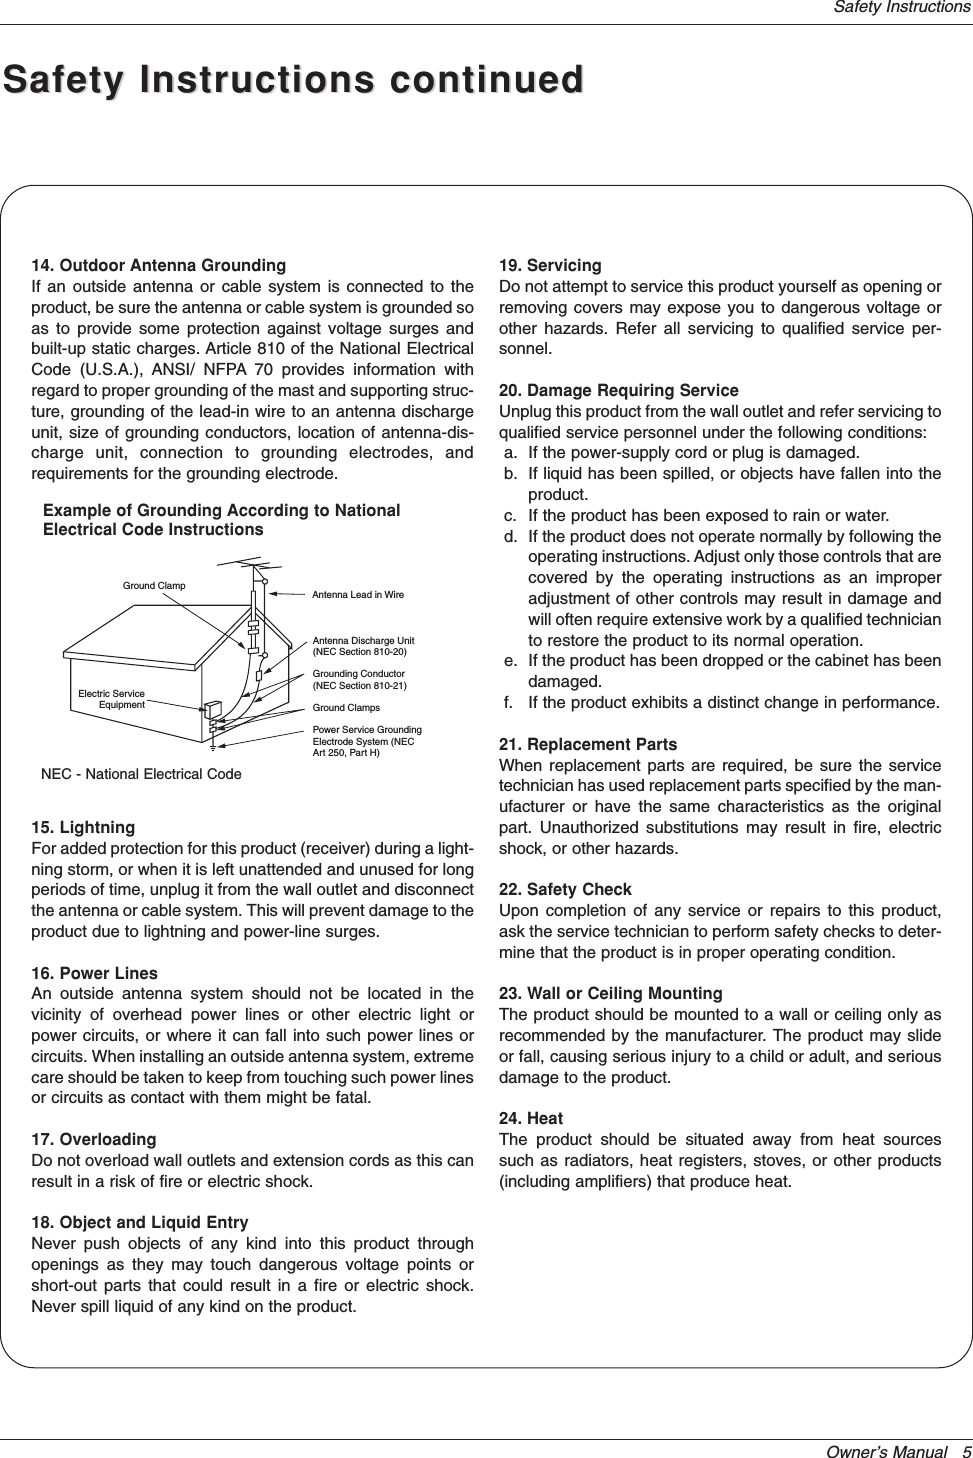 Owner’s Manual   5Safety InstructionsAntenna Lead in WireAntenna Discharge Unit(NEC Section 810-20)Grounding Conductor(NEC Section 810-21)Ground ClampsPower Service GroundingElectrode System (NECArt 250, Part H)Ground ClampElectric ServiceEquipmentExample of Grounding According to NationalElectrical Code InstructionsNEC - National Electrical Code14. Outdoor Antenna GroundingIf an outside antenna or cable system is connected to theproduct, be sure the antenna or cable system is grounded soas to provide some protection against voltage surges andbuilt-up static charges. Article 810 of the National ElectricalCode (U.S.A.), ANSI/ NFPA 70 provides information withregard to proper grounding of the mast and supporting struc-ture, grounding of the lead-in wire to an antenna dischargeunit, size of grounding conductors, location of antenna-dis-charge unit, connection to grounding electrodes, andrequirements for the grounding electrode. 15. Lightning For added protection for this product (receiver) during a light-ning storm, or when it is left unattended and unused for longperiods of time, unplug it from the wall outlet and disconnectthe antenna or cable system. This will prevent damage to theproduct due to lightning and power-line surges.16. Power LinesAn outside antenna system should not be located in thevicinity of overhead power lines or other electric light orpower circuits, or where it can fall into such power lines orcircuits. When installing an outside antenna system, extremecare should be taken to keep from touching such power linesor circuits as contact with them might be fatal.17. OverloadingDo not overload wall outlets and extension cords as this canresult in a risk of fire or electric shock.18. Object and Liquid EntryNever push objects of any kind into this product throughopenings as they may touch dangerous voltage points orshort-out parts that could result in a fire or electric shock.Never spill liquid of any kind on the product.19. ServicingDo not attempt to service this product yourself as opening orremoving covers may expose you to dangerous voltage orother hazards. Refer all servicing to qualified service per-sonnel.20. Damage Requiring ServiceUnplug this product from the wall outlet and refer servicing toqualified service personnel under the following conditions:a. If the power-supply cord or plug is damaged.b. If liquid has been spilled, or objects have fallen into theproduct.c. If the product has been exposed to rain or water.d. If the product does not operate normally by following theoperating instructions. Adjust only those controls that arecovered by the operating instructions as an improperadjustment of other controls may result in damage andwill often require extensive work by a qualified technicianto restore the product to its normal operation.e. If the product has been dropped or the cabinet has beendamaged.f. If the product exhibits a distinct change in performance.21. Replacement PartsWhen replacement parts are required, be sure the servicetechnician has used replacement parts specified by the man-ufacturer or have the same characteristics as the originalpart. Unauthorized substitutions may result in fire, electricshock, or other hazards.22. Safety CheckUpon completion of any service or repairs to this product,ask the service technician to perform safety checks to deter-mine that the product is in proper operating condition.23. Wall or Ceiling MountingThe product should be mounted to a wall or ceiling only asrecommended by the manufacturer. The product may slideor fall, causing serious injury to a child or adult, and seriousdamage to the product.24. HeatThe product should be situated away from heat sourcessuch as radiators, heat registers, stoves, or other products(including amplifiers) that produce heat.Safety Instructions continuedSafety Instructions continued